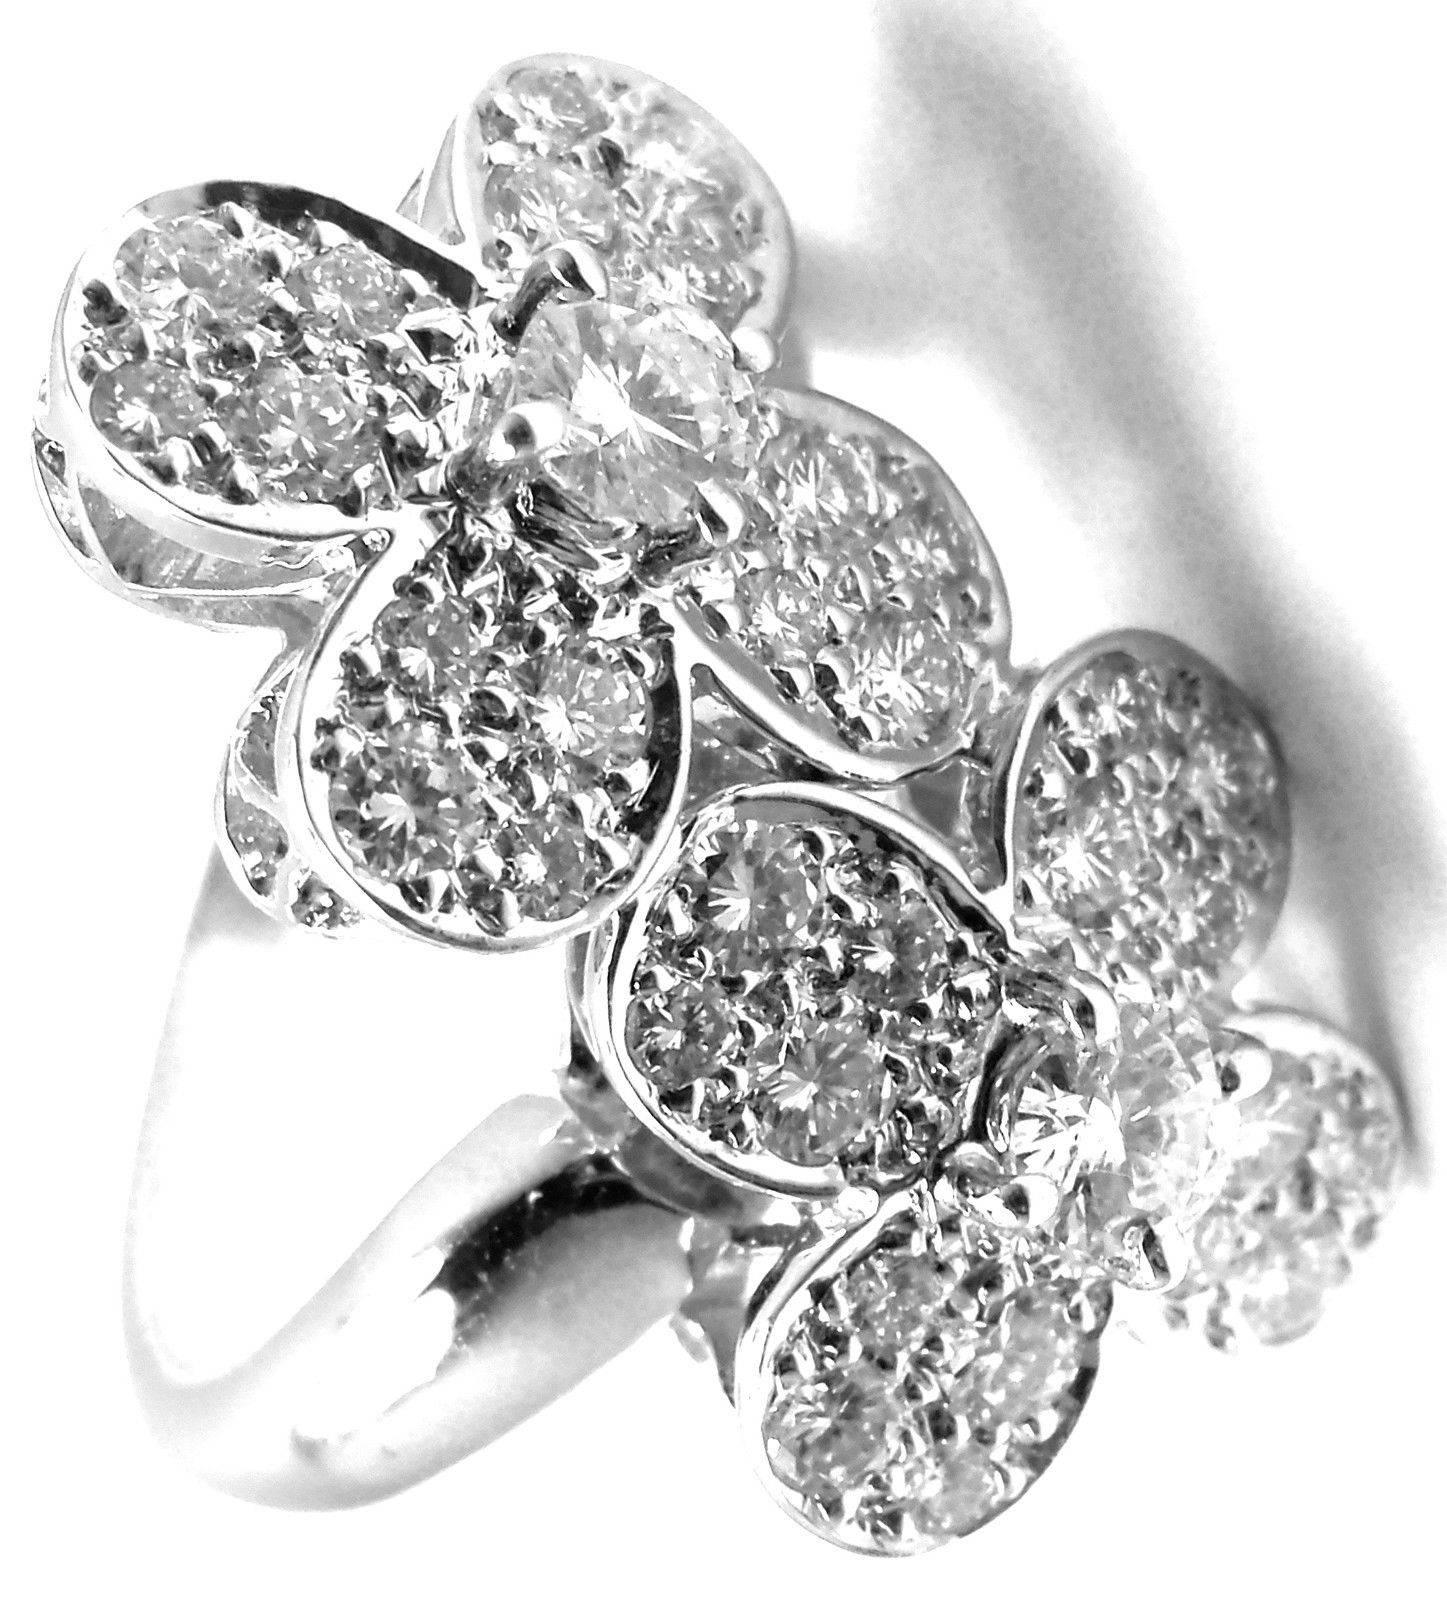 18k White Gold Diamond Double Trefle Clover Flower Ring by Van Cleef & Arpels. 
With 34x Diamonds VVS1 clarity, E color total weight approx. 1.5ct  
Details: 
Size: 5 (resizing is available)
Width: 22mm 
Weight: 6.5 grams
Stamped Hallmarks: